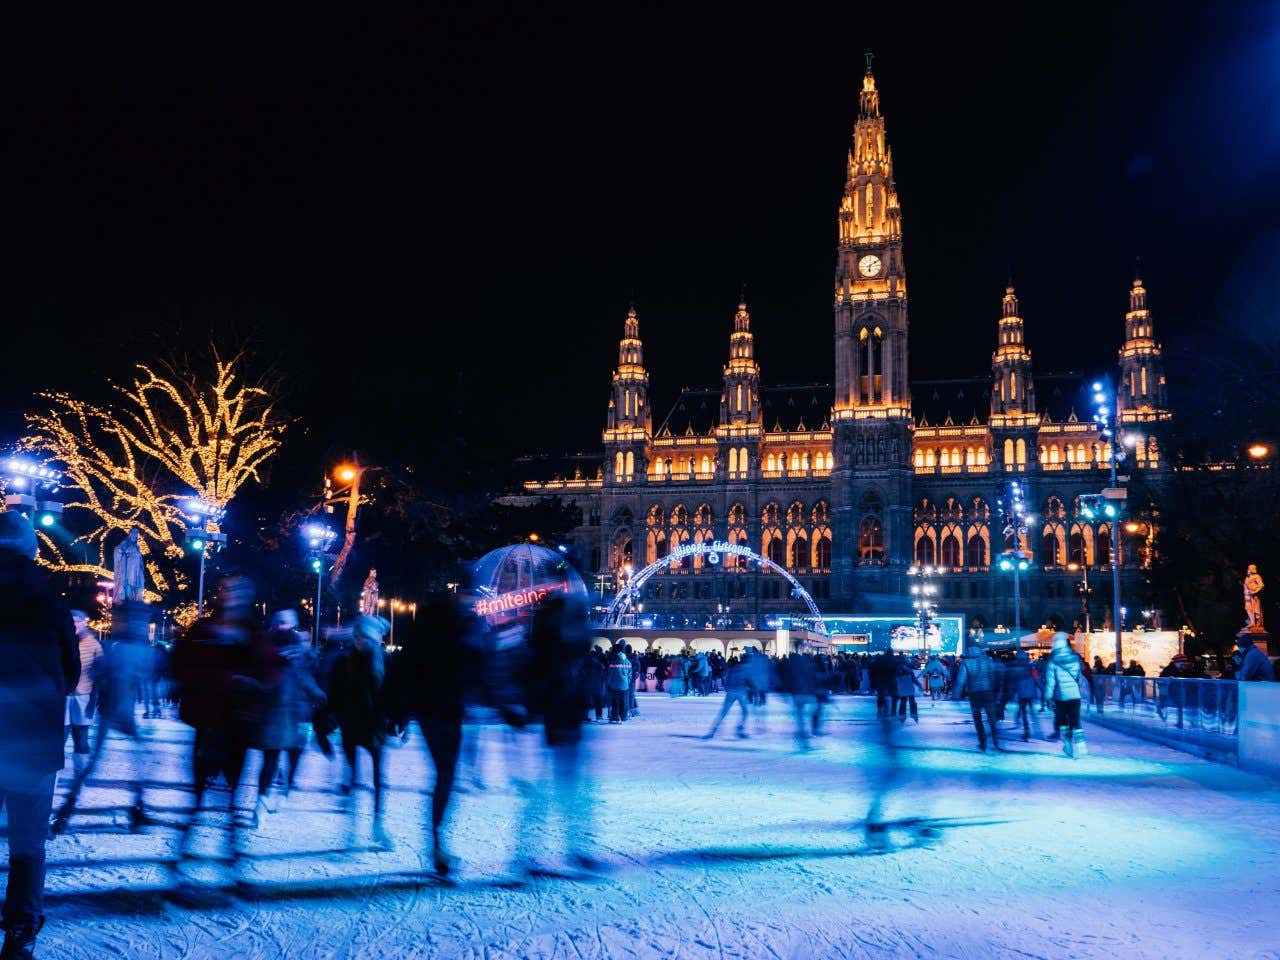 Vienna Ice Dream ice rink full of people ice skating around the rink, in front of the beautiful city hall.